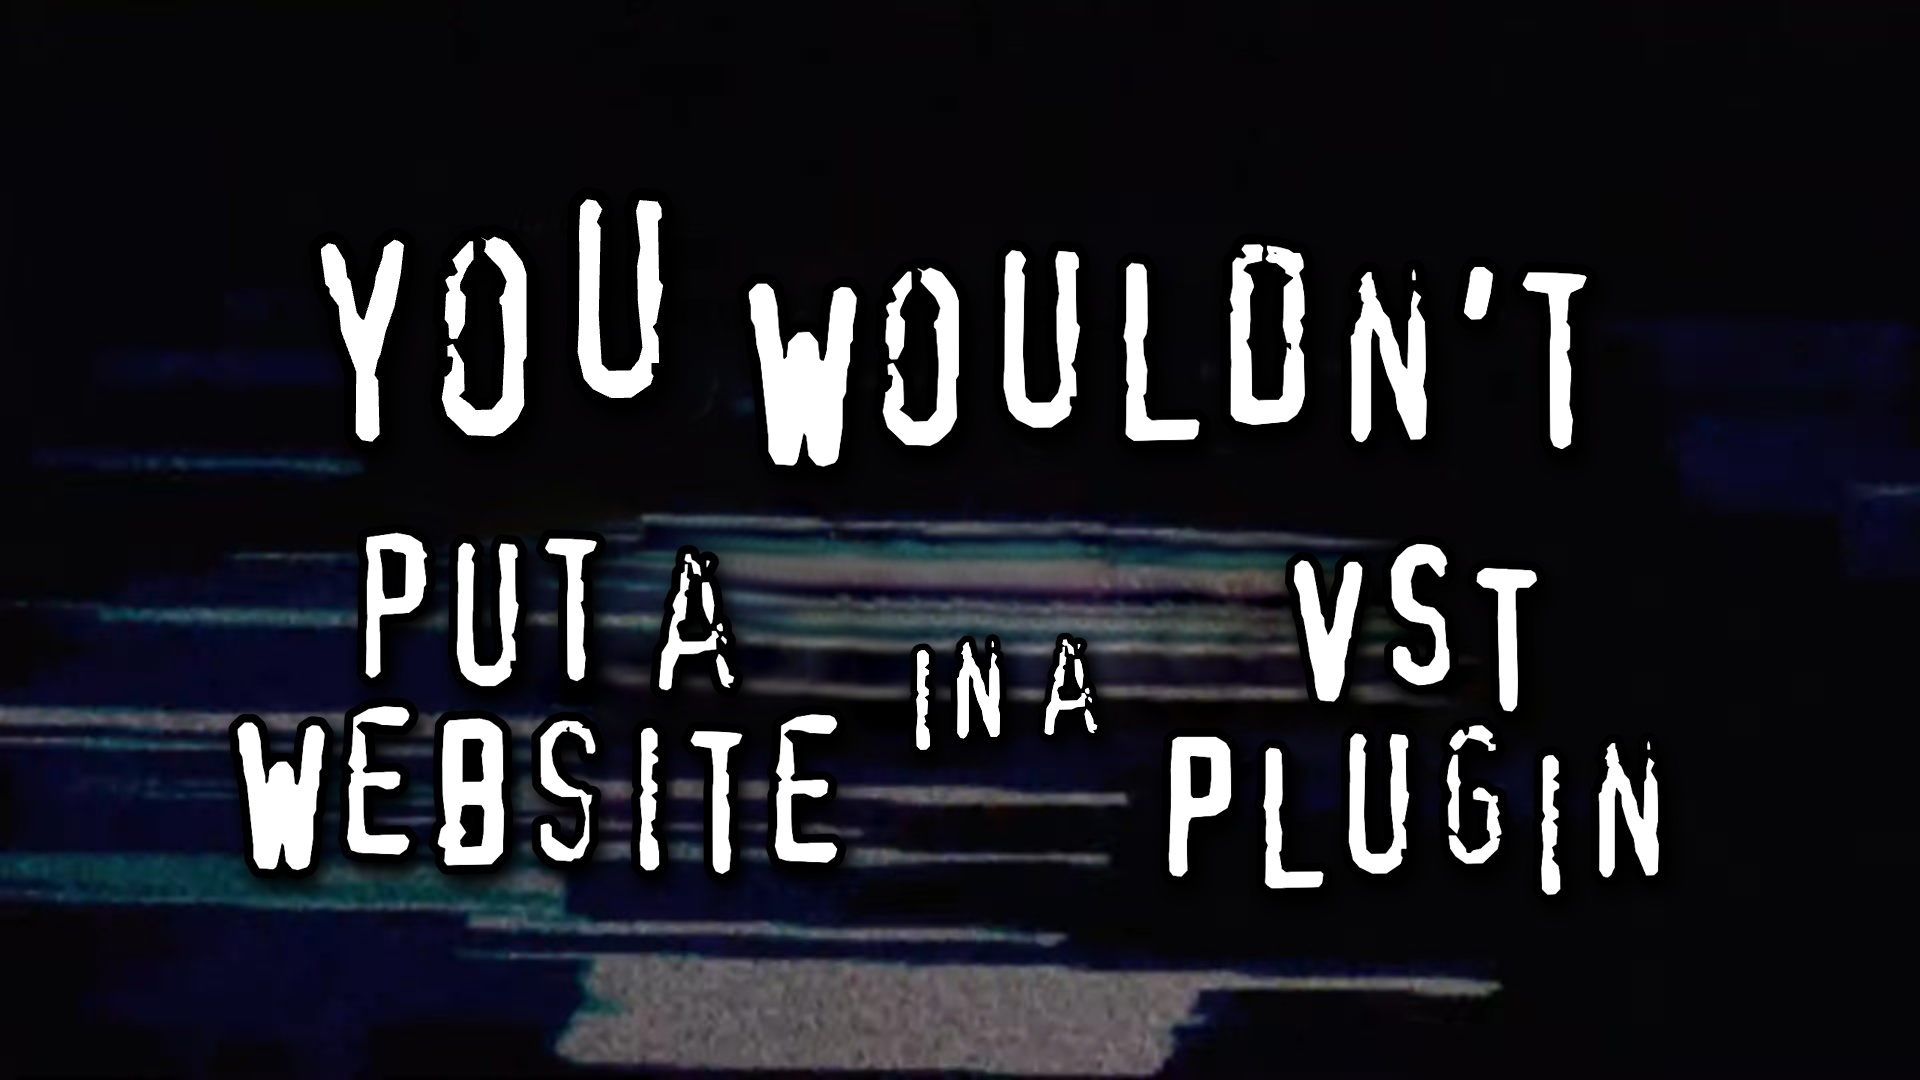 You wouldn't put a web browser in a VST plugin meme